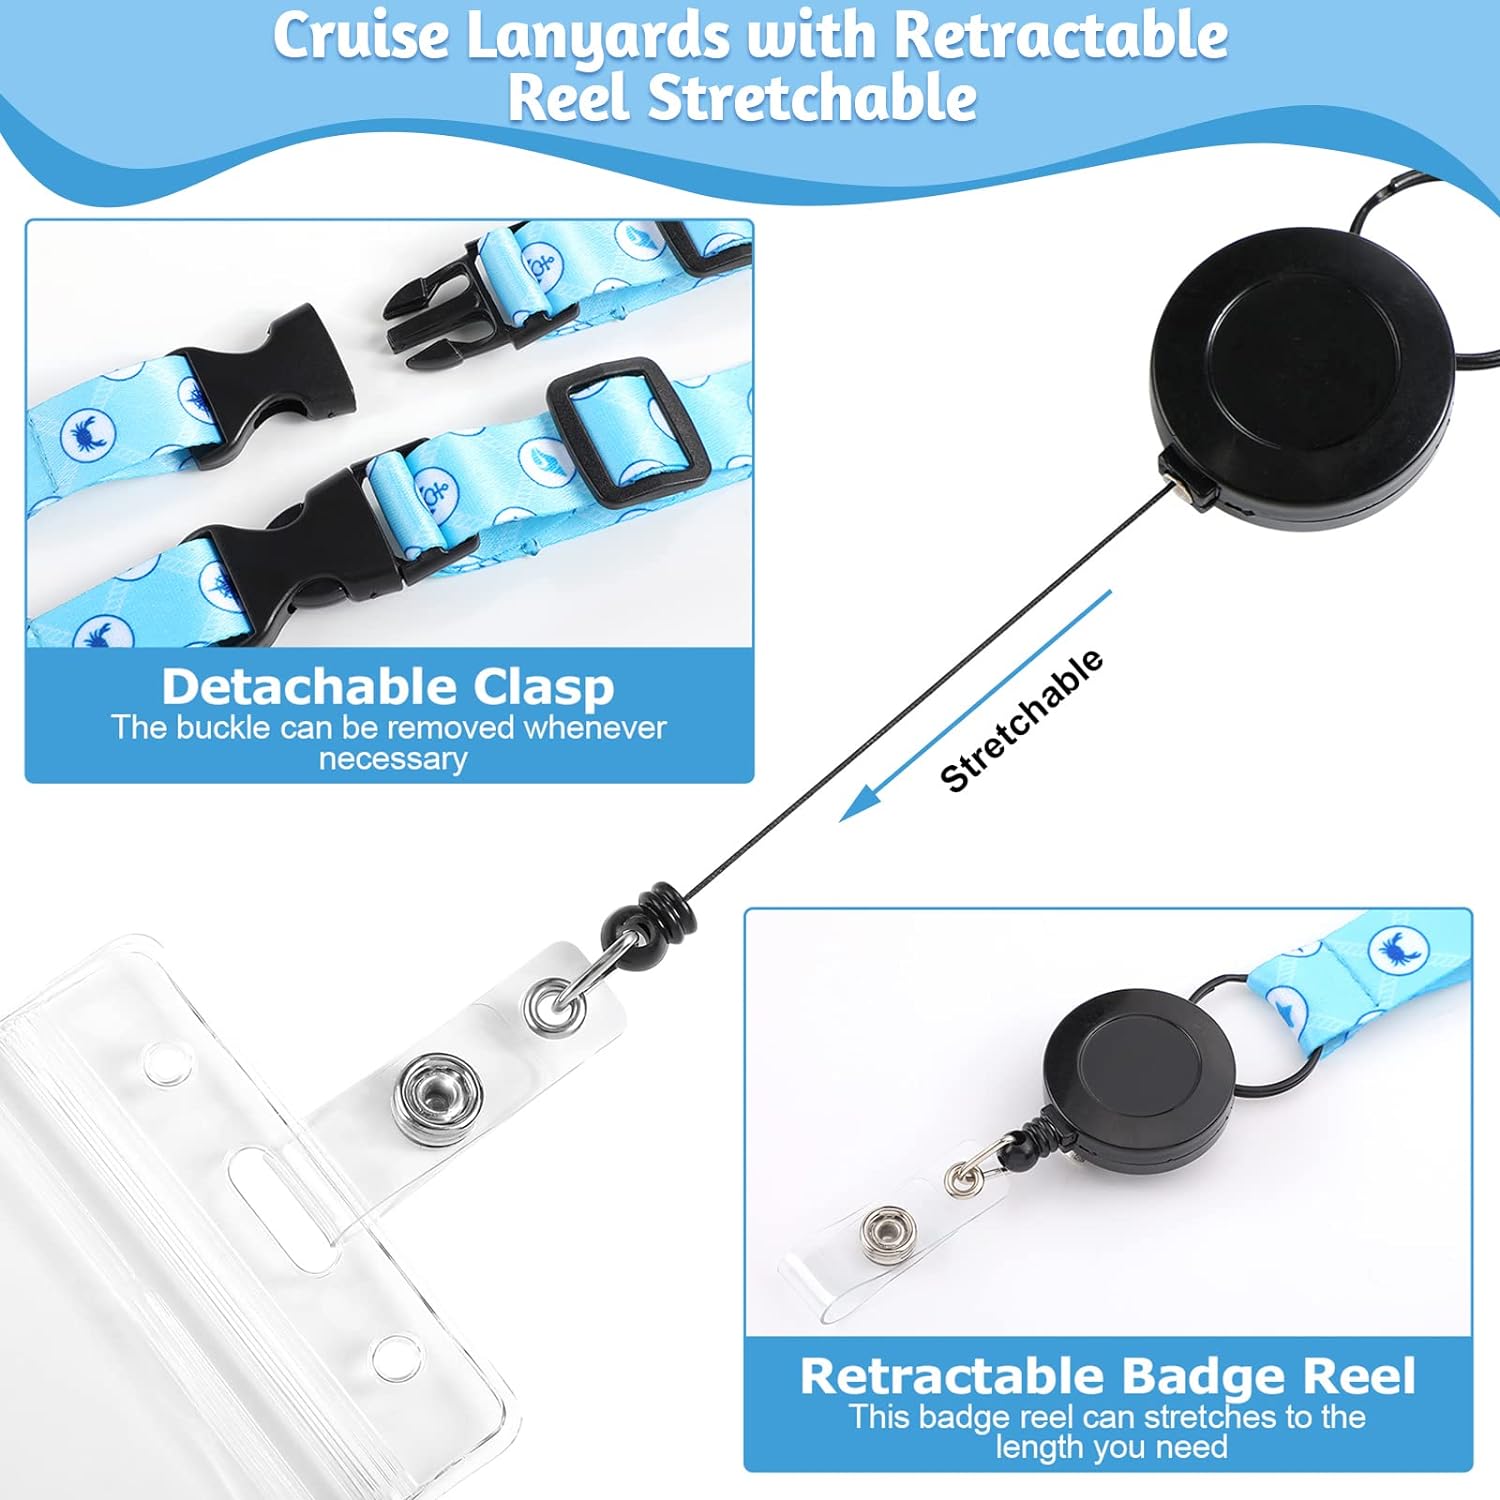 6 Sets Cruise Lanyards for Cruise Ship Cards Retractable Cruise Lanyards Waterproof ID Badge Holders with 8 Pcs Cruise Luggage Tags for Carnival Cruise(Fresh Sailing)